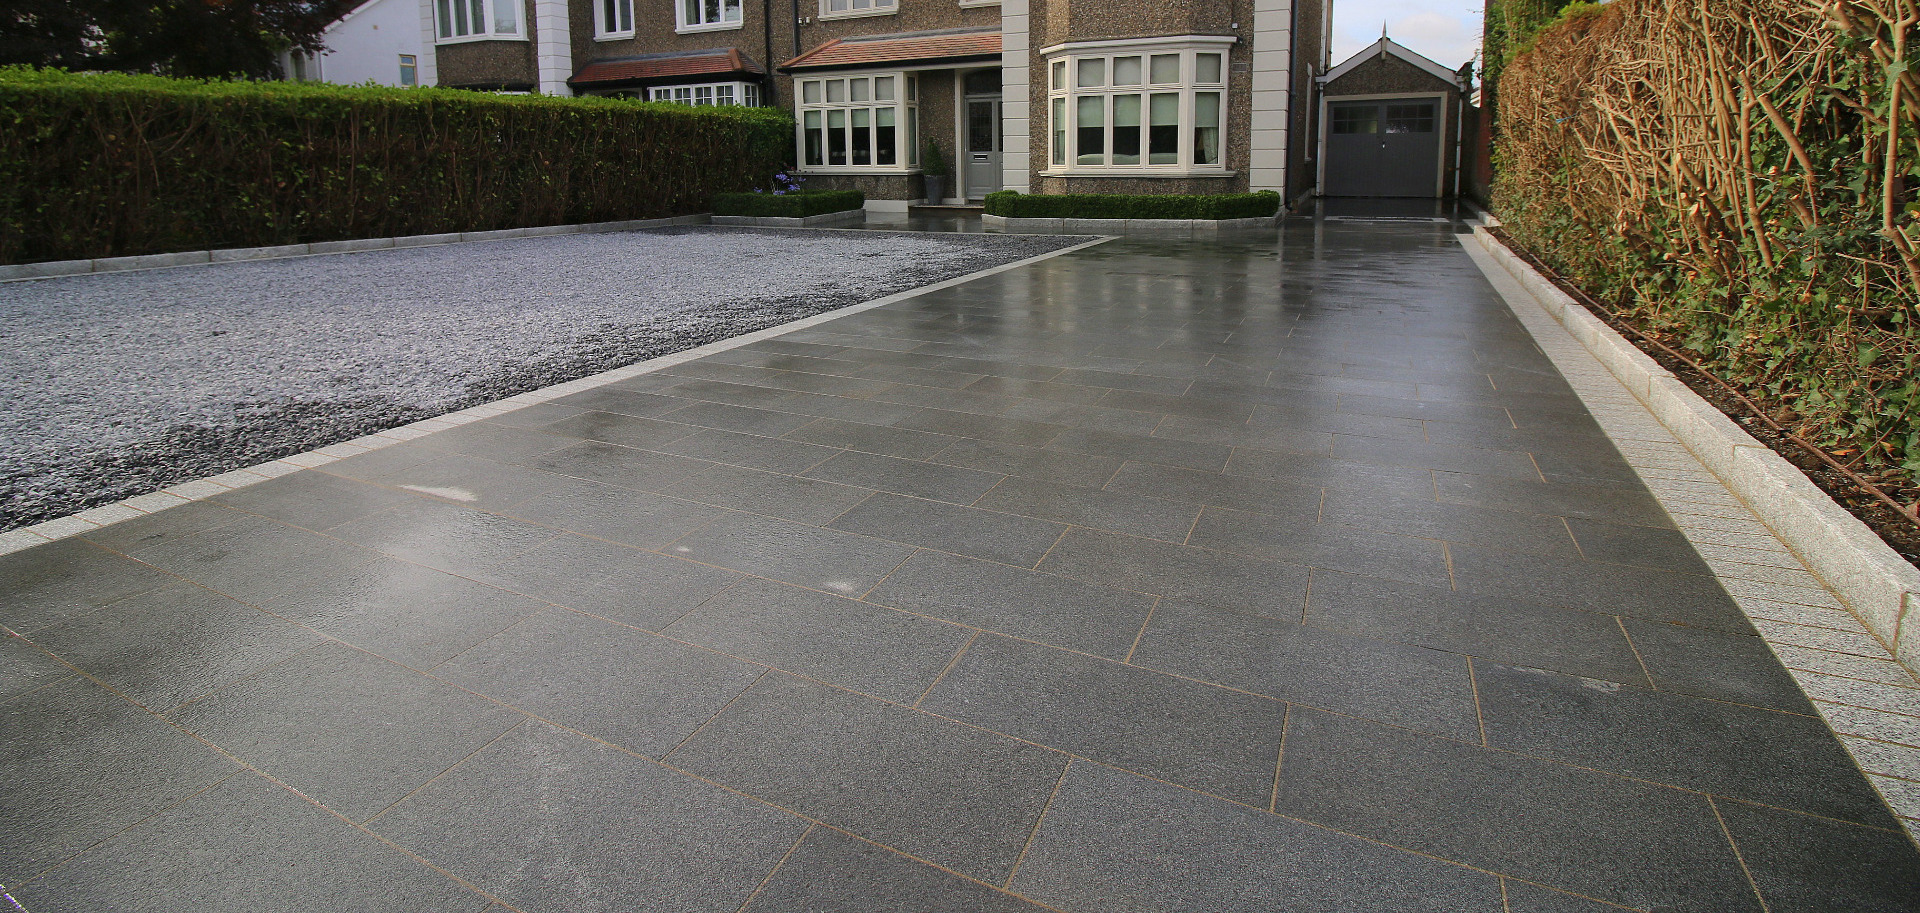 Granite Driveway Design & Landscaping in Terenure by Owen Chubb Landscapers